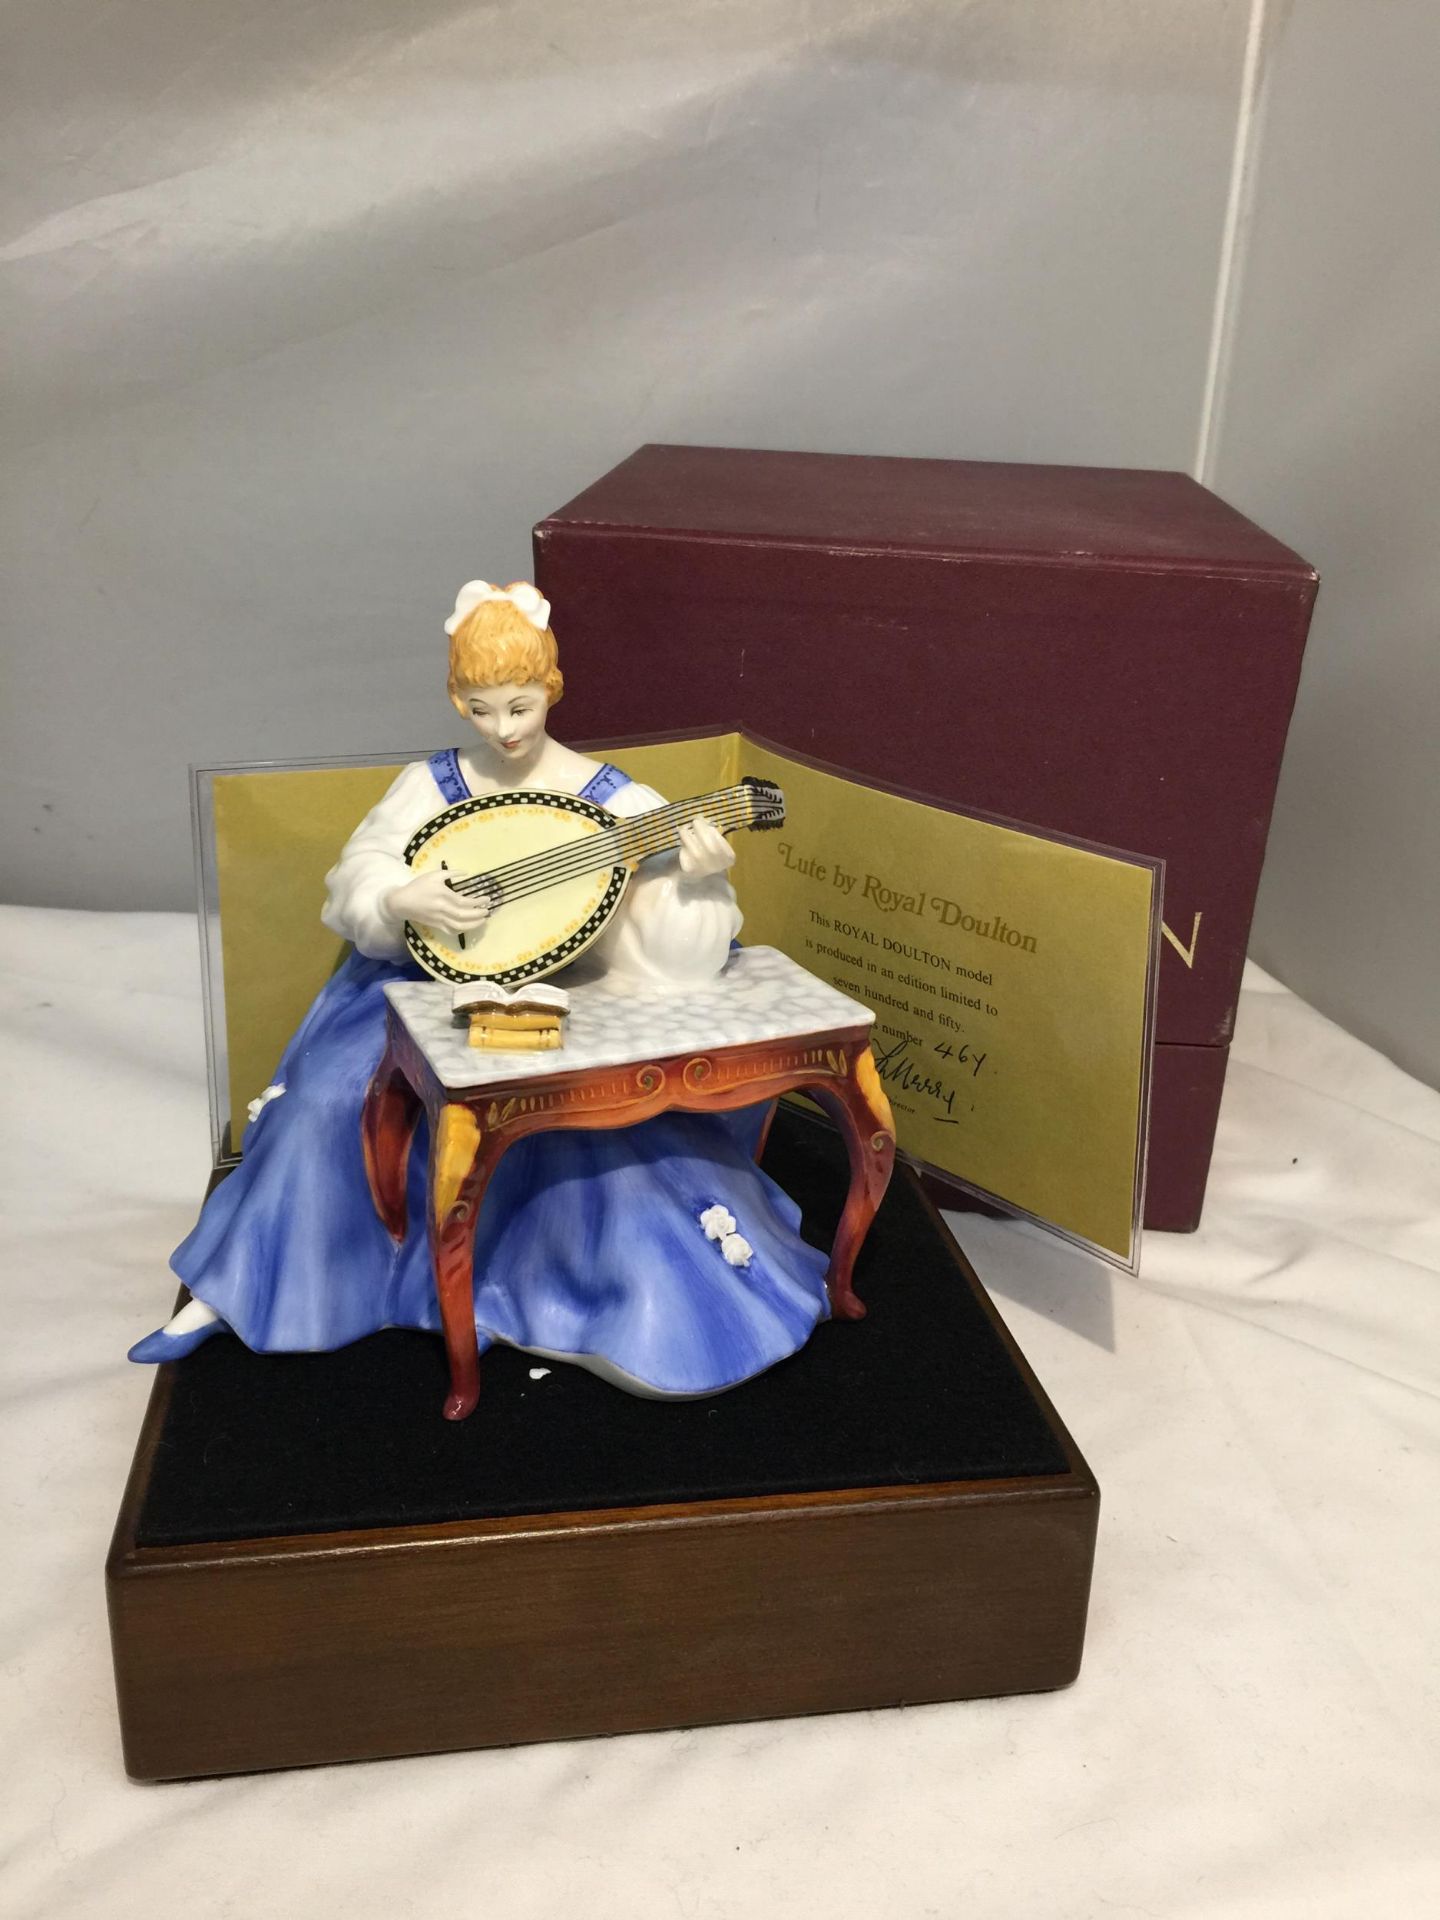 A ROYAL DOULTON FIGURINE, LUTE HN2431, MODELLED BY PEGGY DAVIES AS PART OF THE LADY MUSICIANS